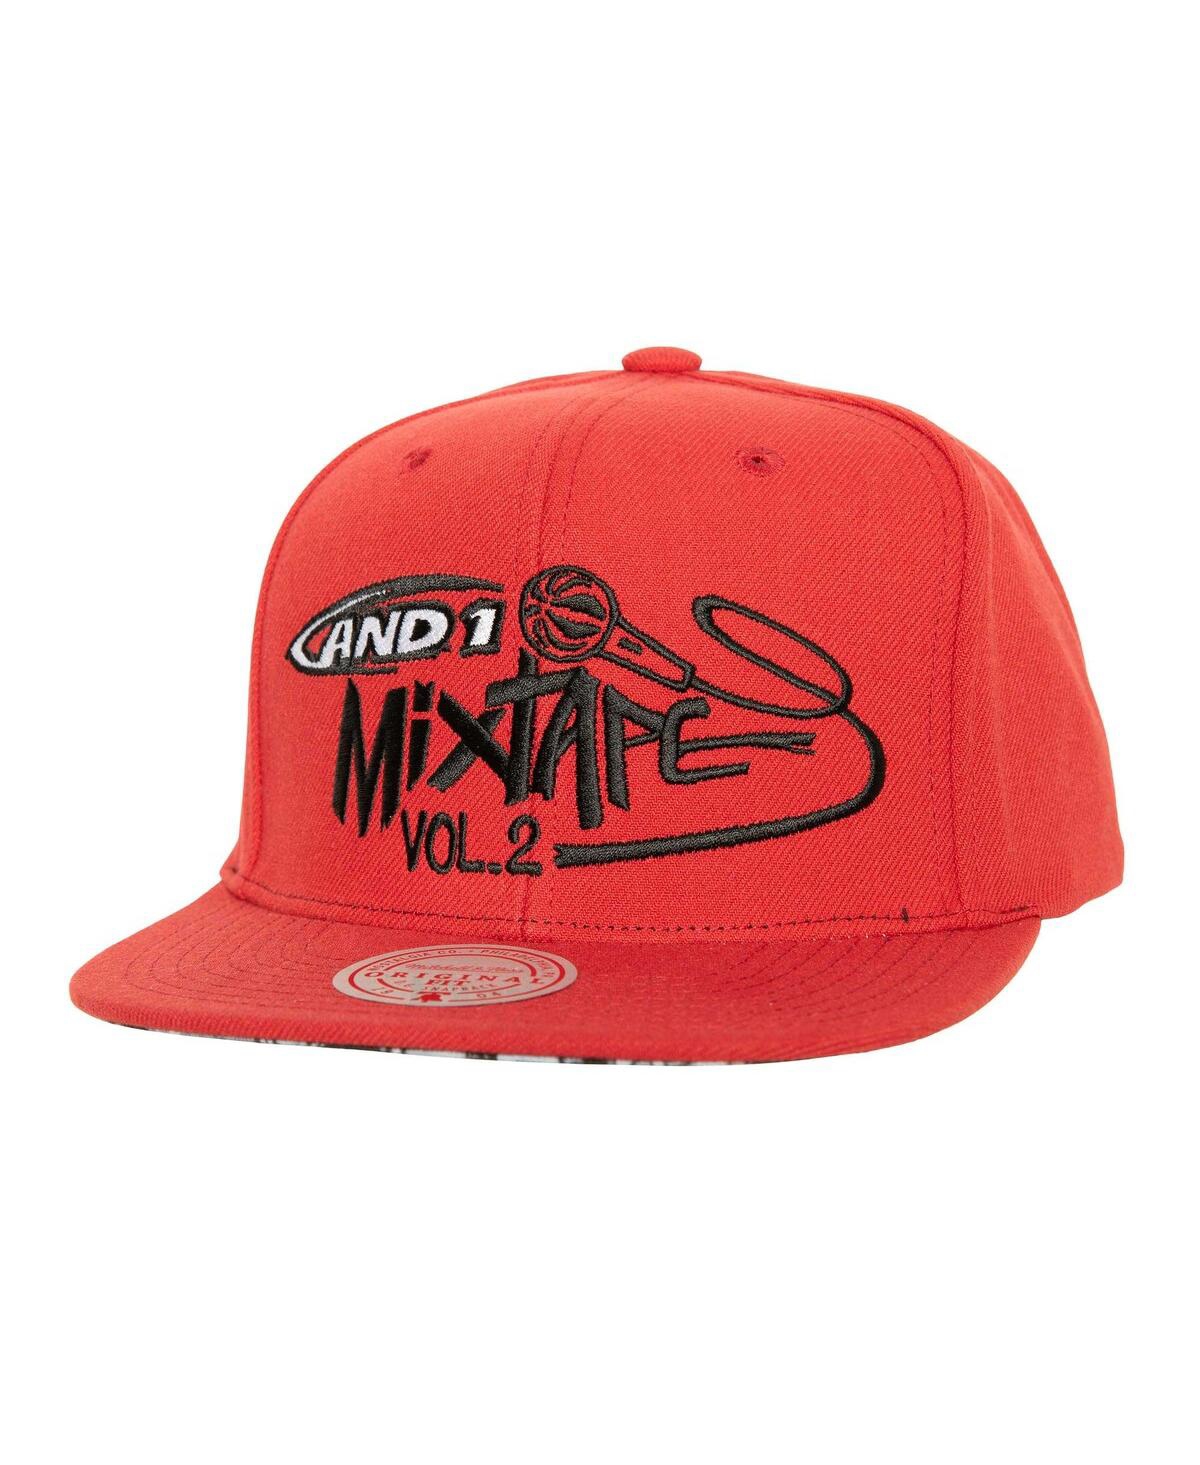 Men's Mitchell & Ness x AND1 Red Mixtape Vol. 2 Adjustable Hat - Red